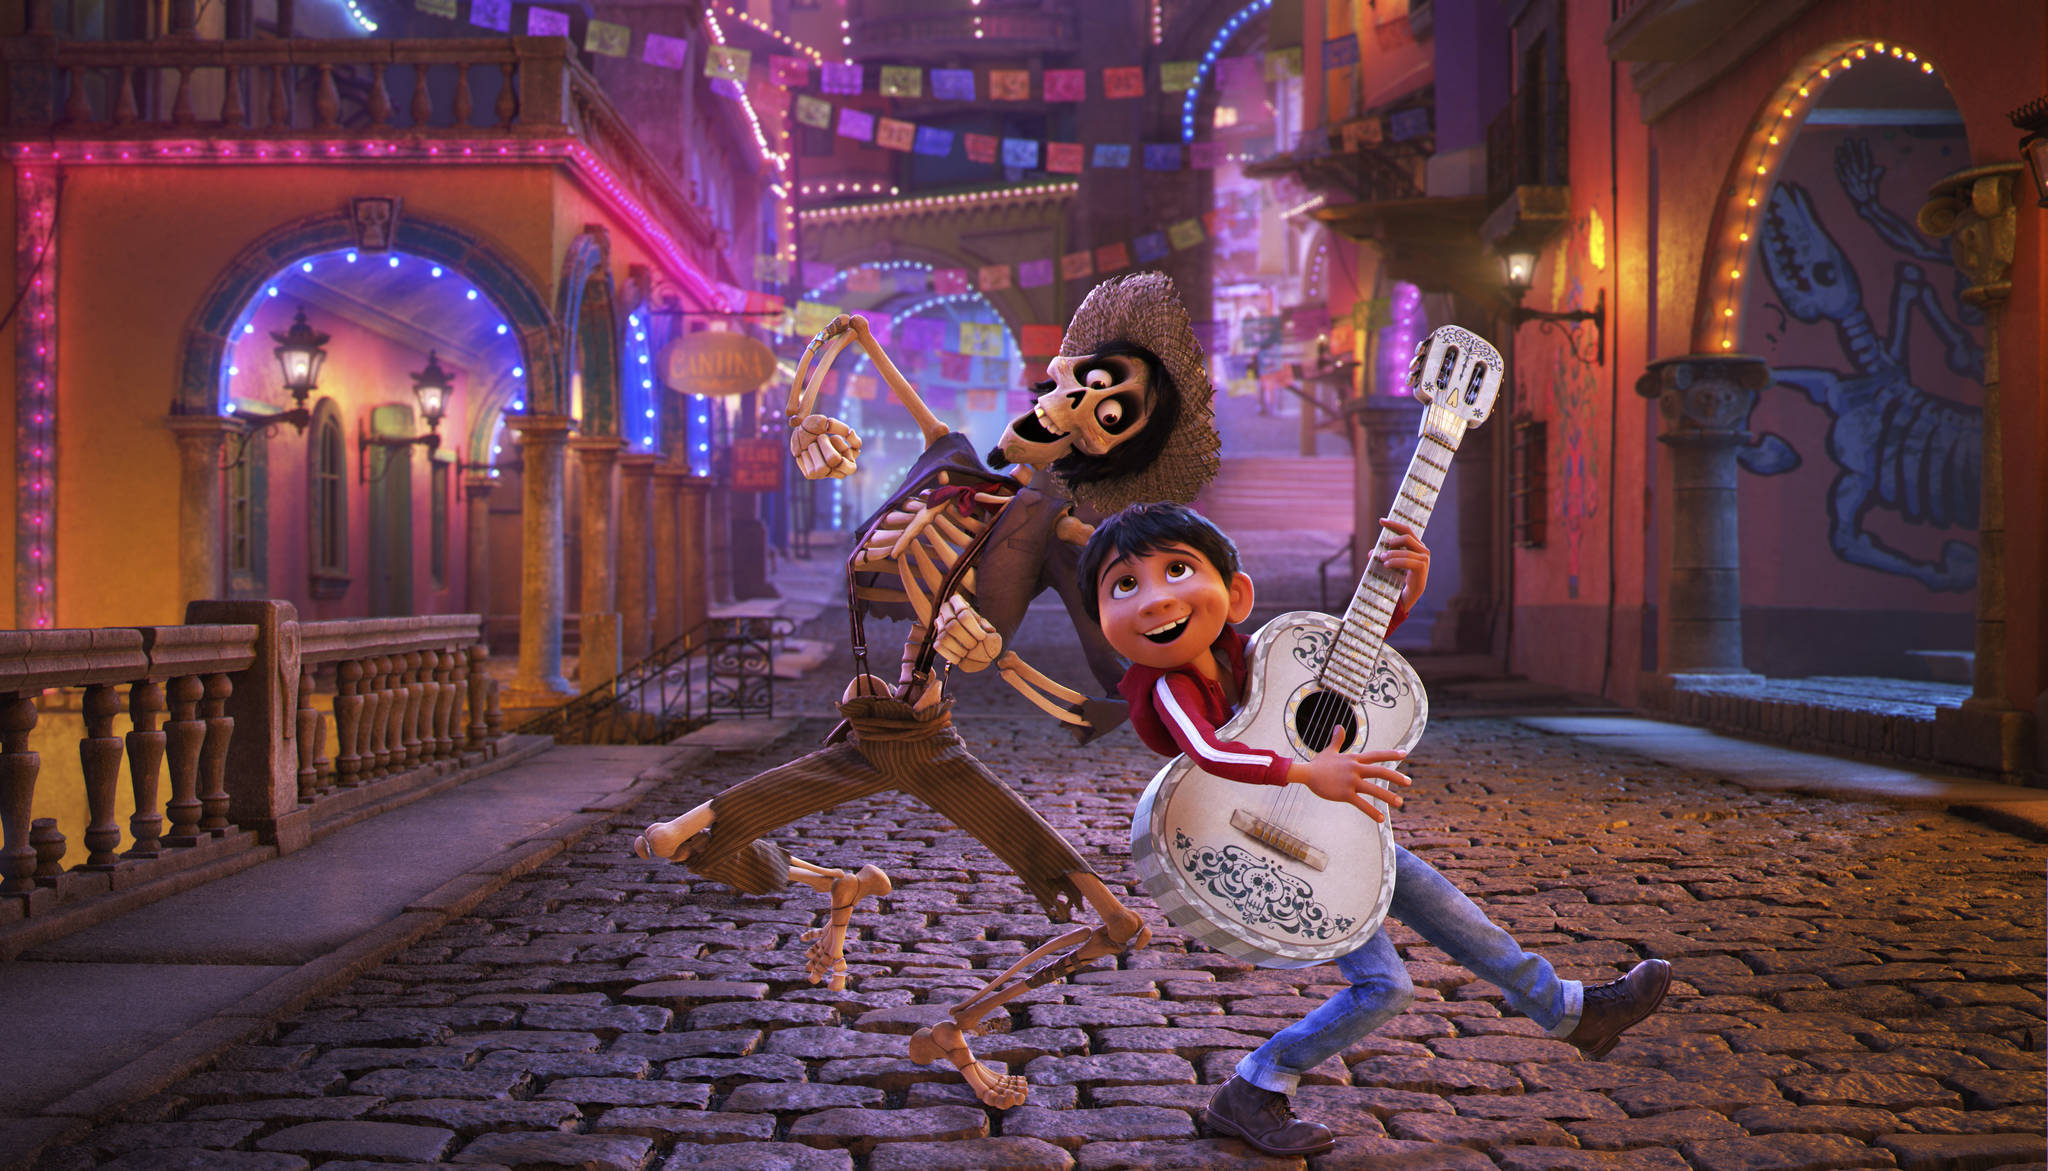 In this image released by Disney-Pixar, character Hector, voiced by Gael Garcia Bernal, left, and Miguel, voiced by Anthony Gonzalez, appear in a scene from the animated film, “Coco.” (Disney-Pixar via AP)